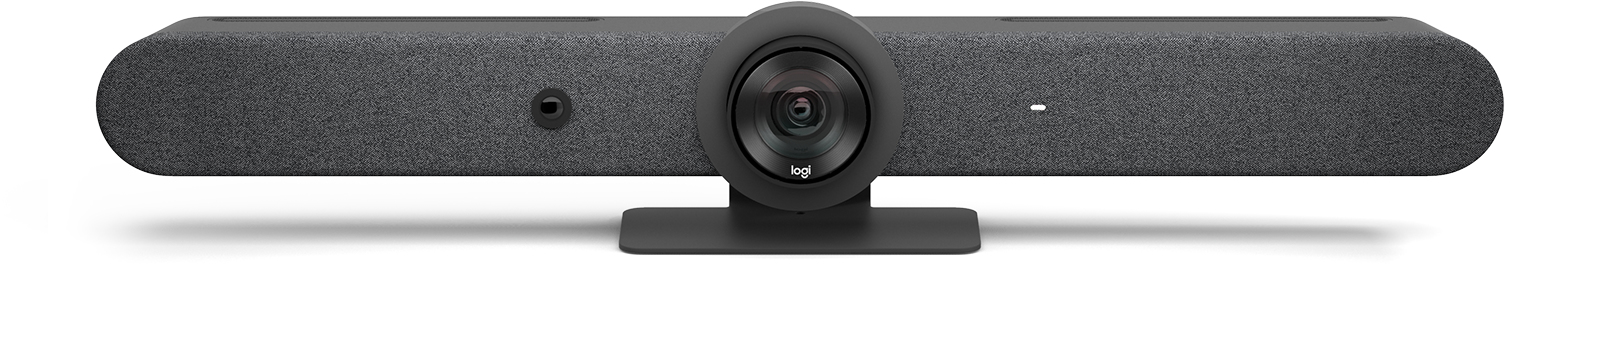 Logitech - Video conferencing kit (Logitech Tap IP, Logitech Rally Bar) - Zoom Certified, Certified for Microsoft Teams, RingCentral Certified - graphite